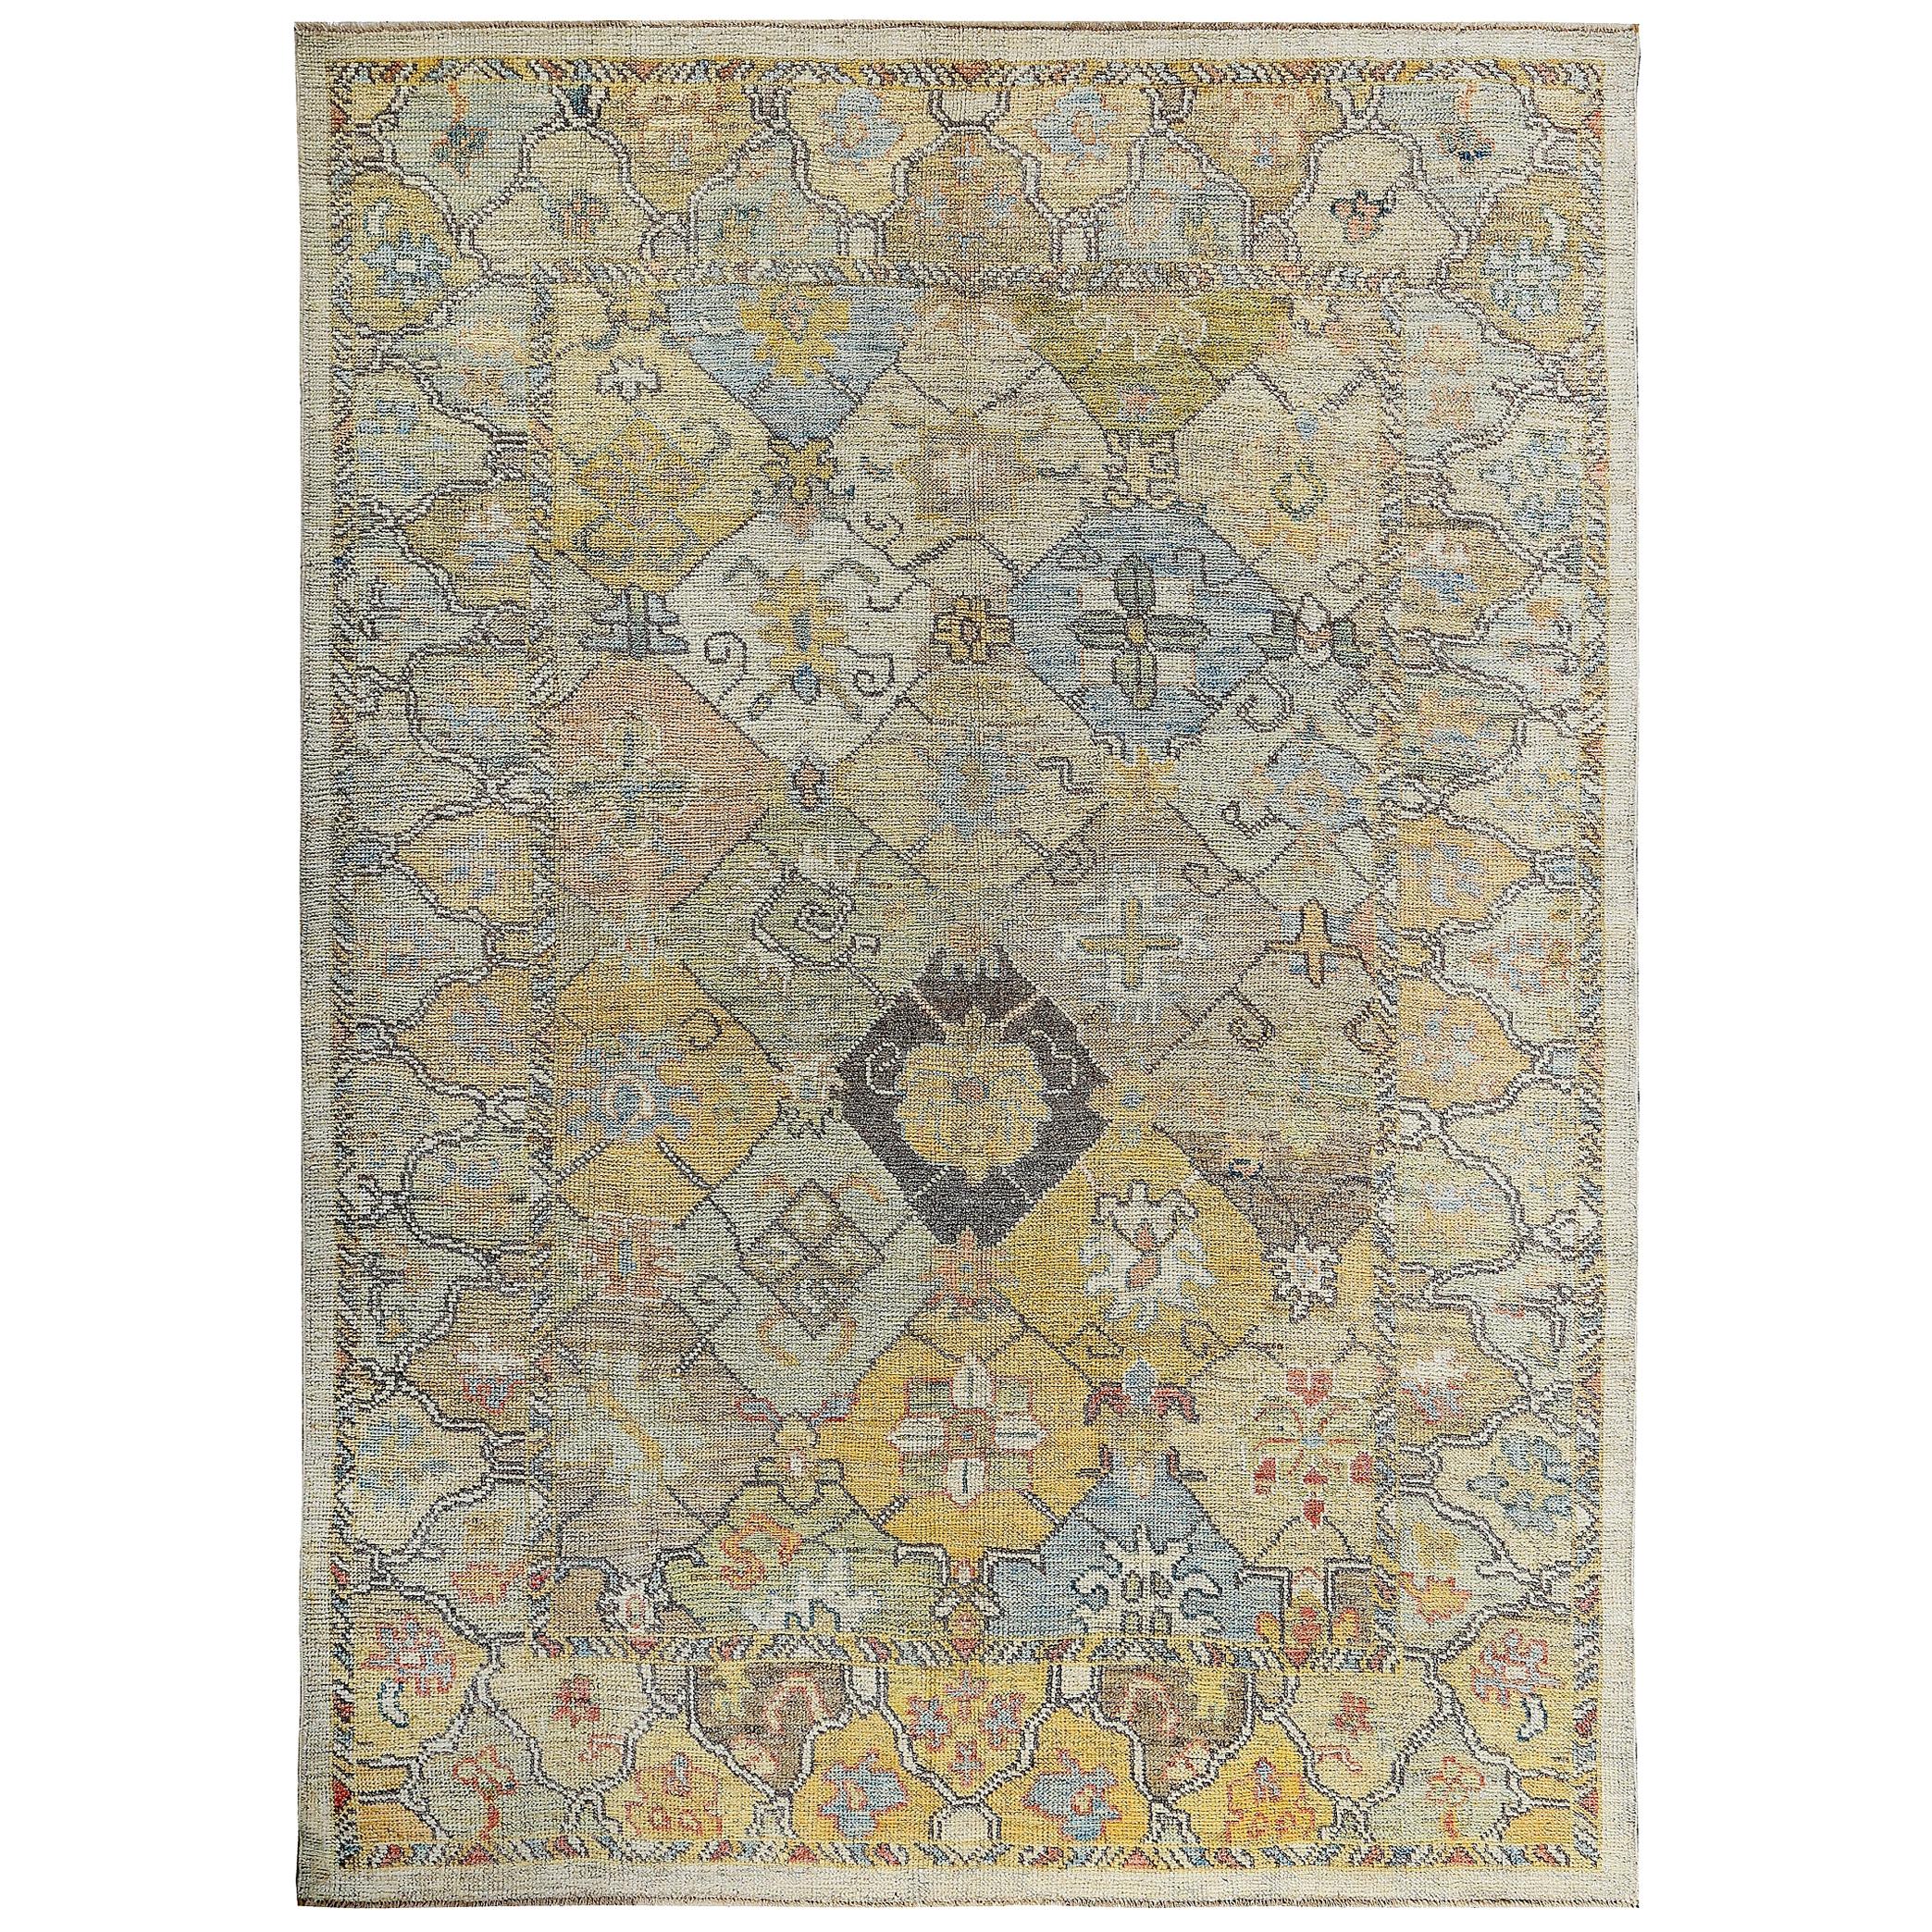 Nazmiyal Collection Garden Design Modern Turkish Oushak Rug 6 ft 10in x 9 ft 4in For Sale